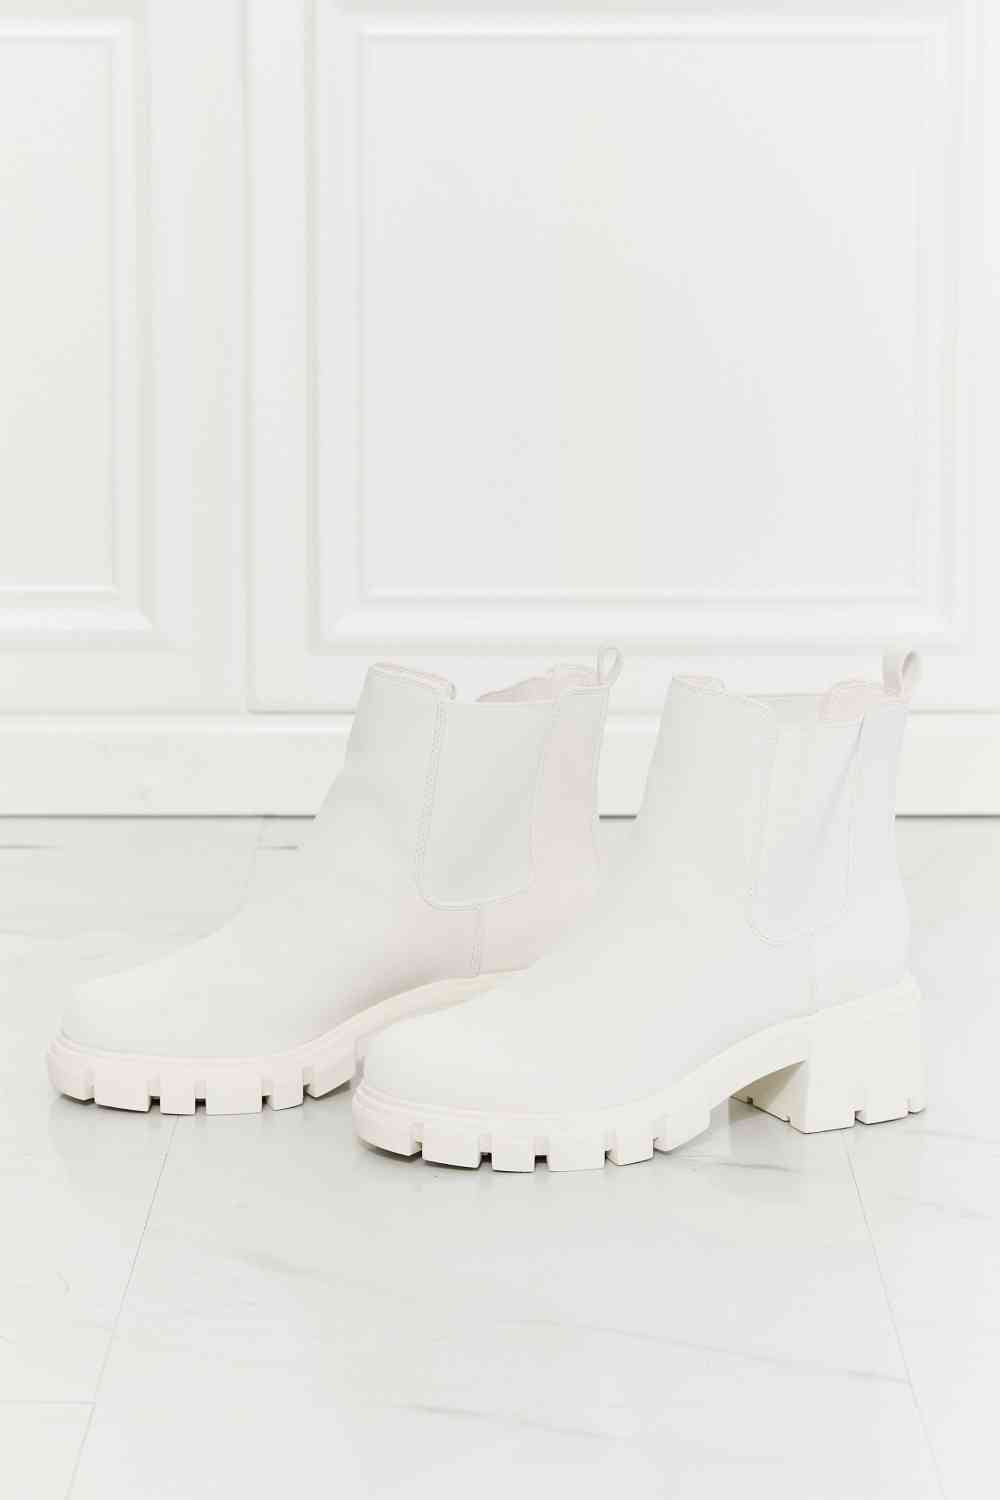 MMShoes Work For It Matte Lug Sole Chelsea Boots in White - Alonna's Legging Land